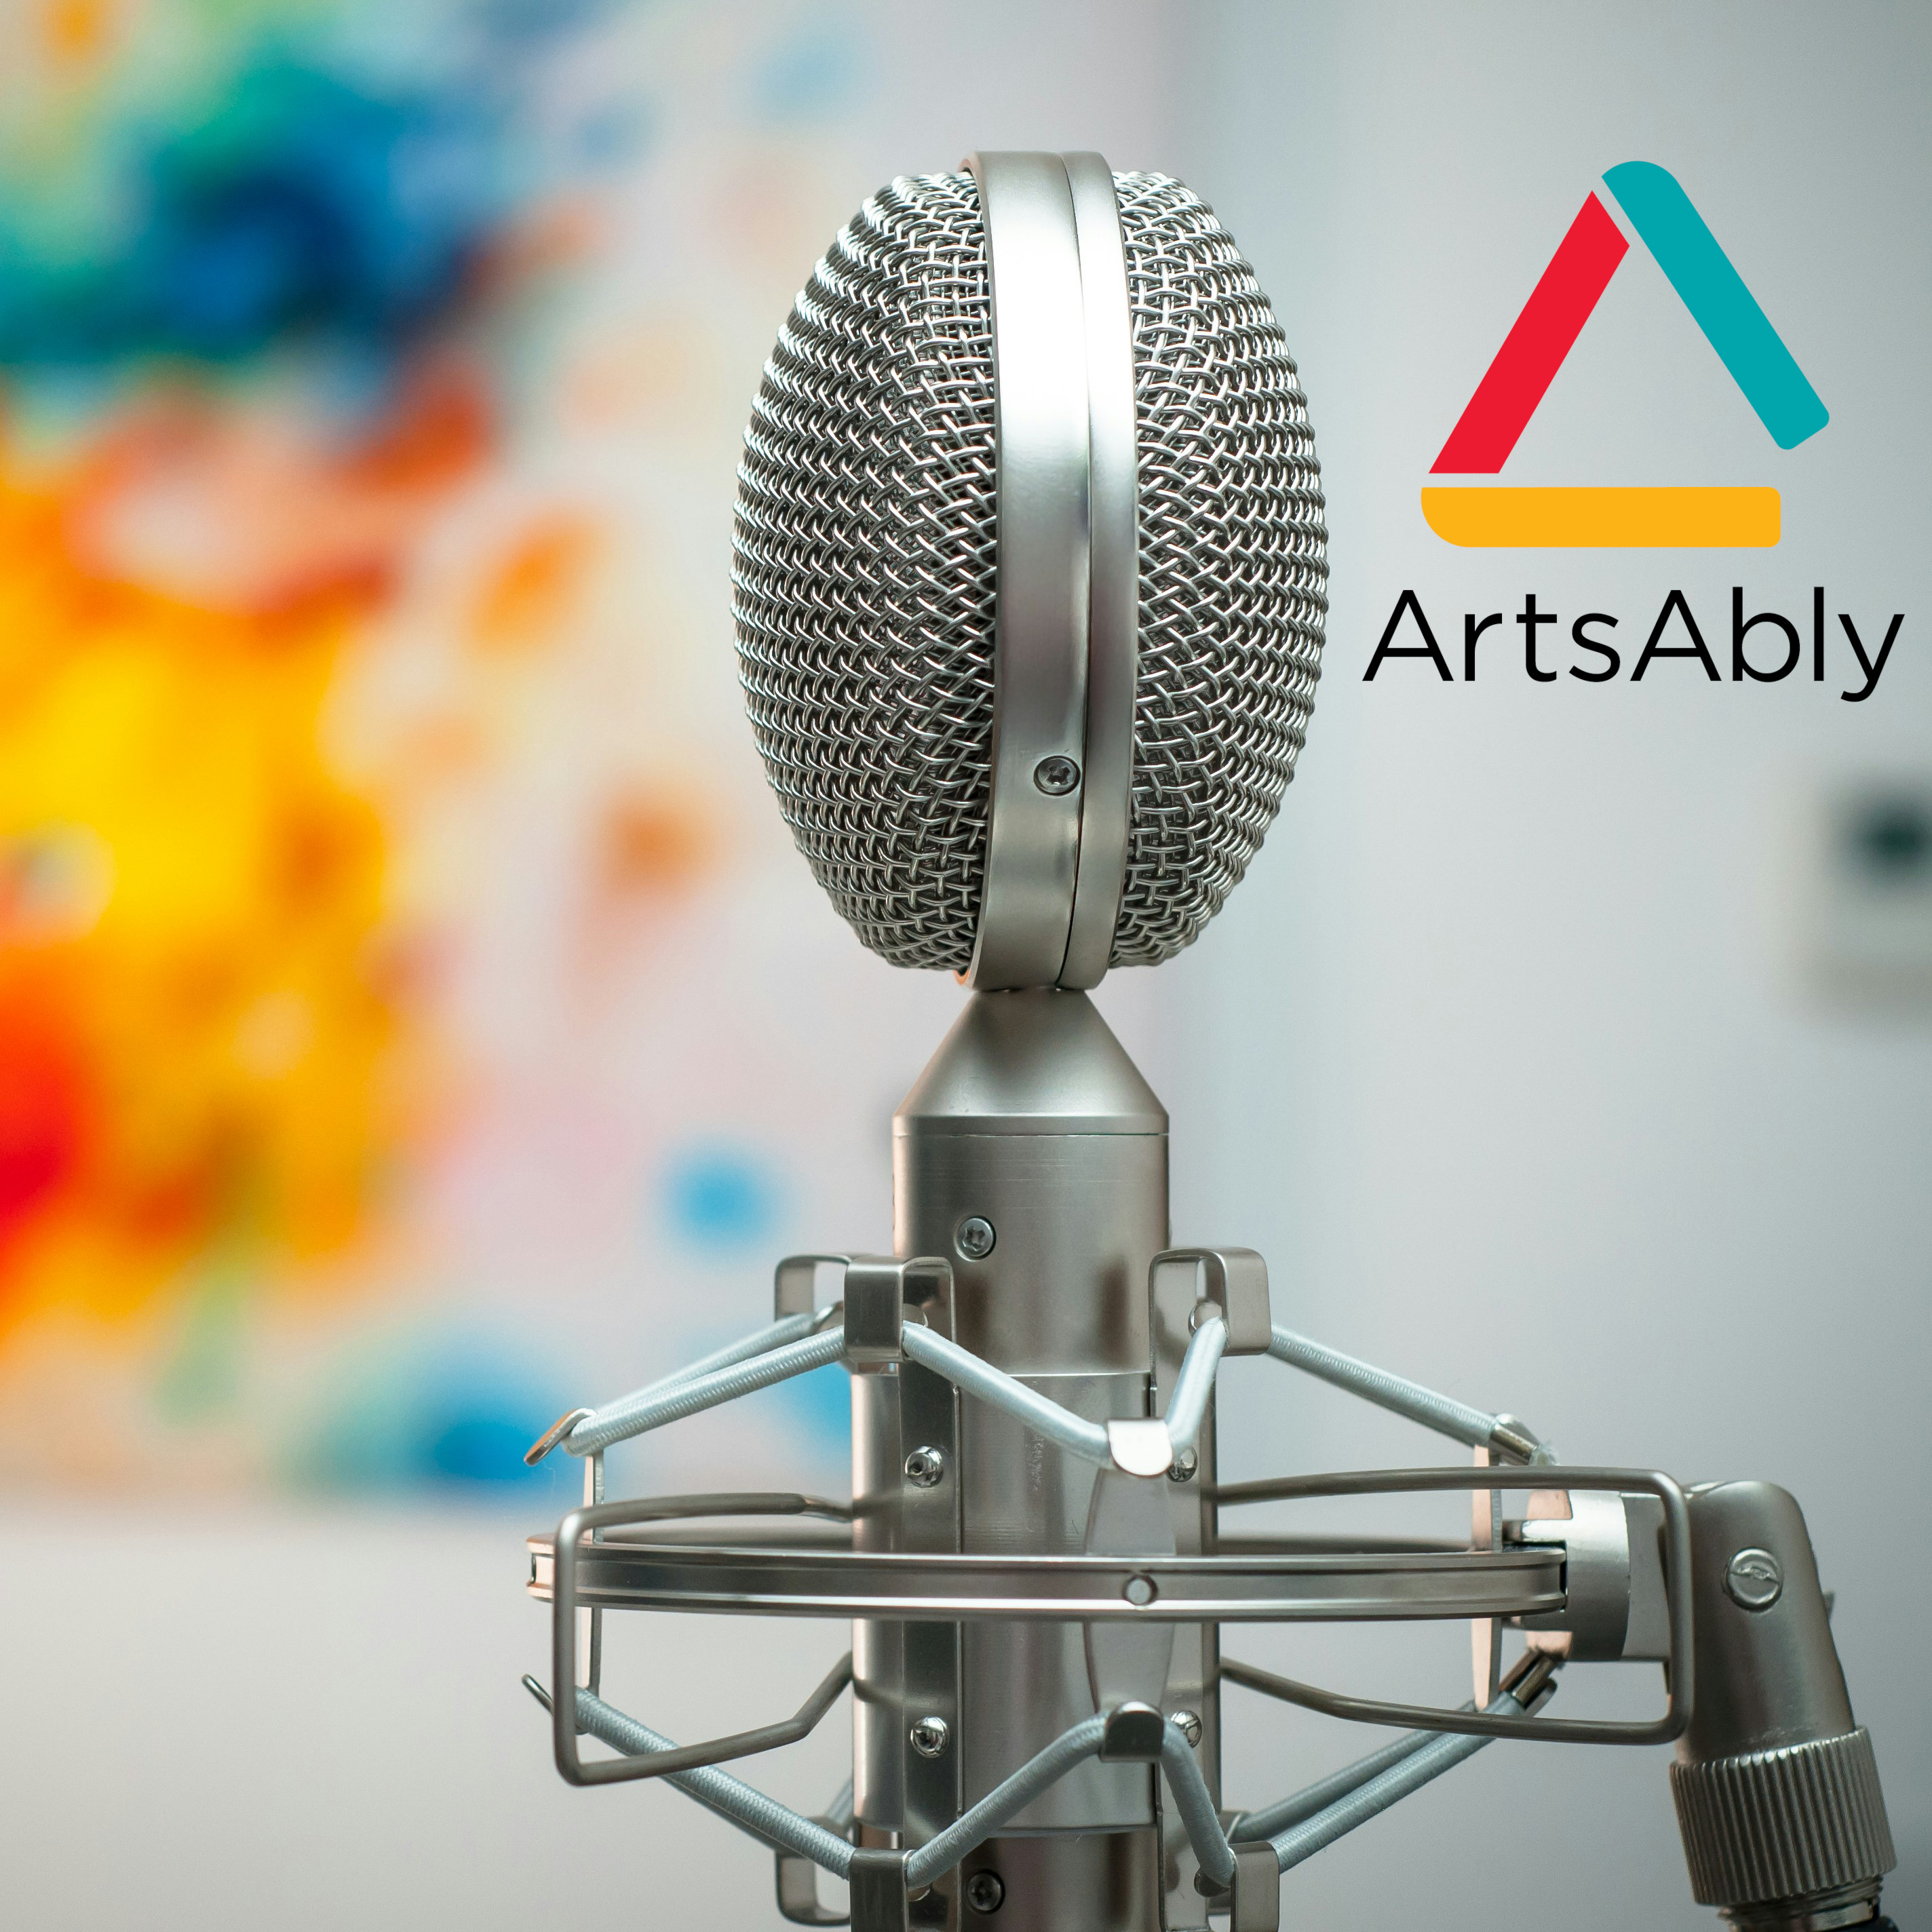 ArtsAbly in Conversation: Arts and Accessibility